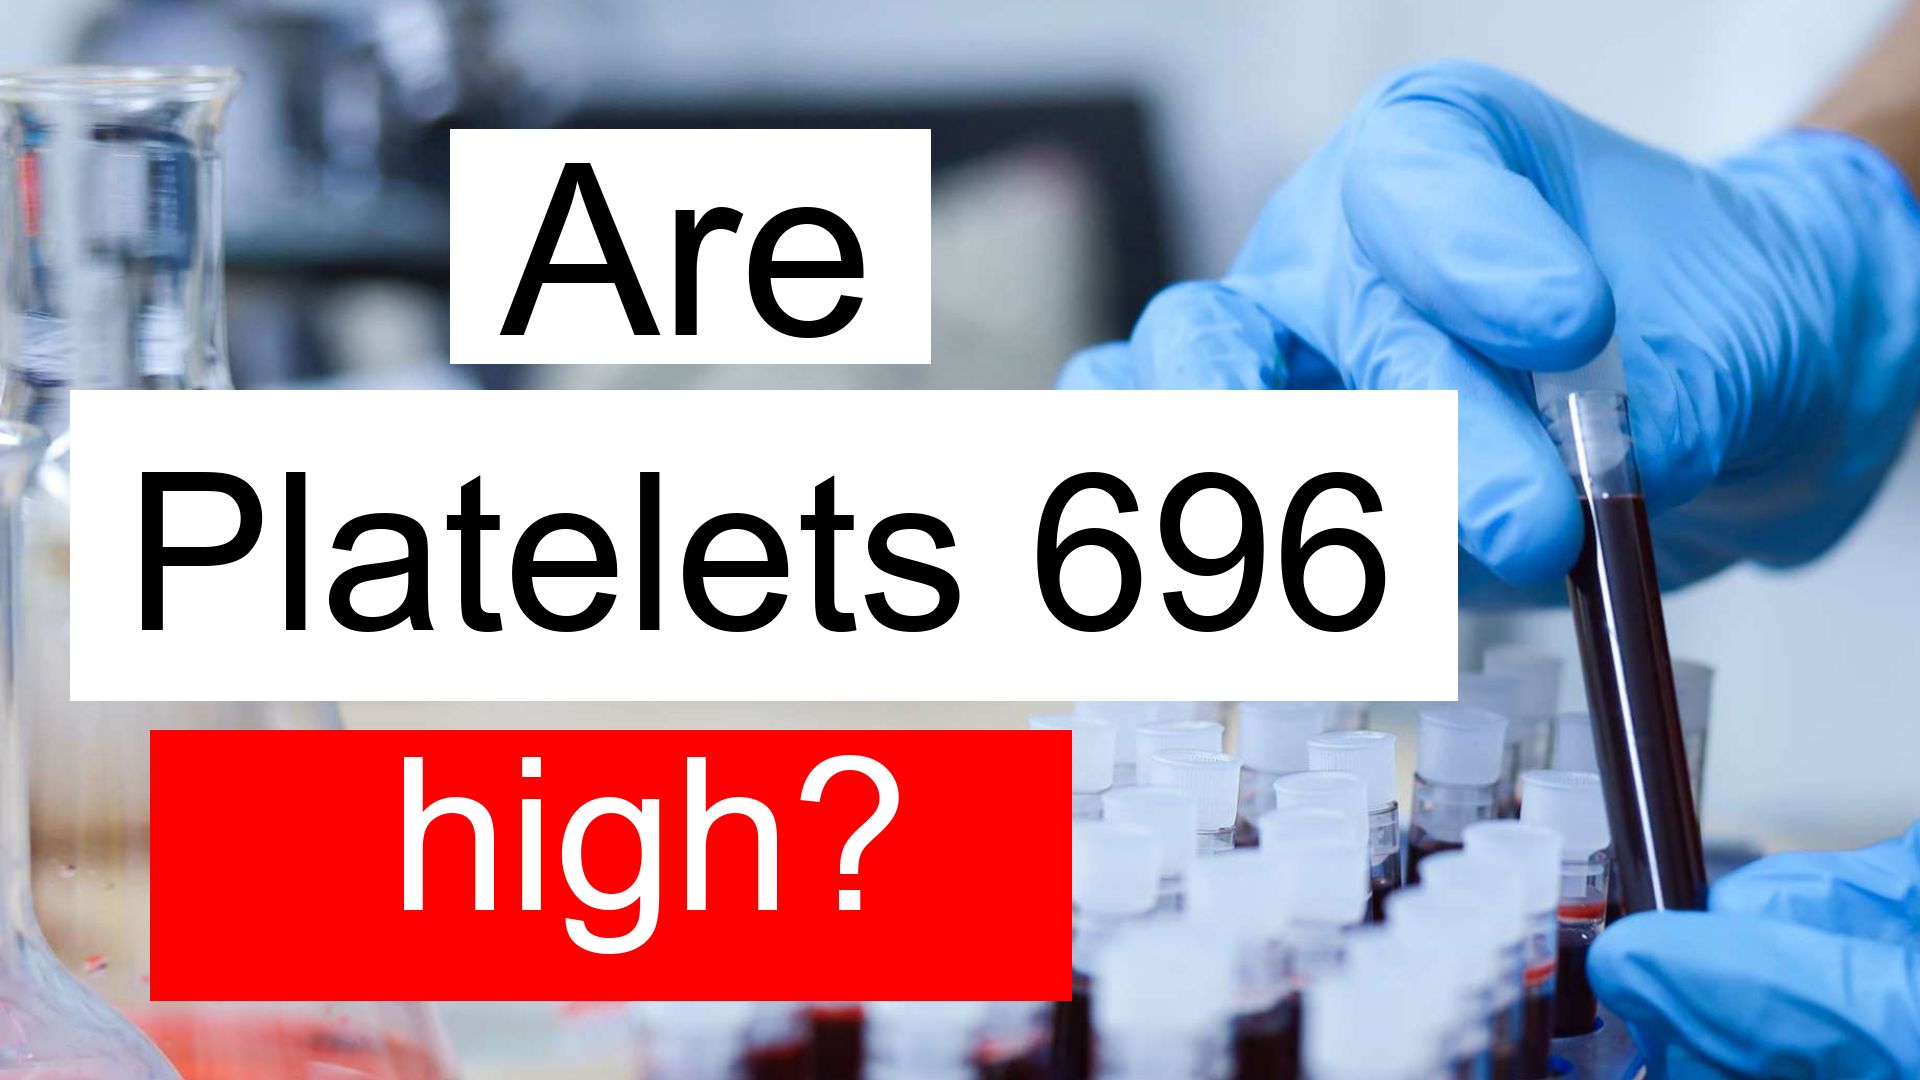 Is Platelet count 696 high, normal or dangerous? What does Platelet